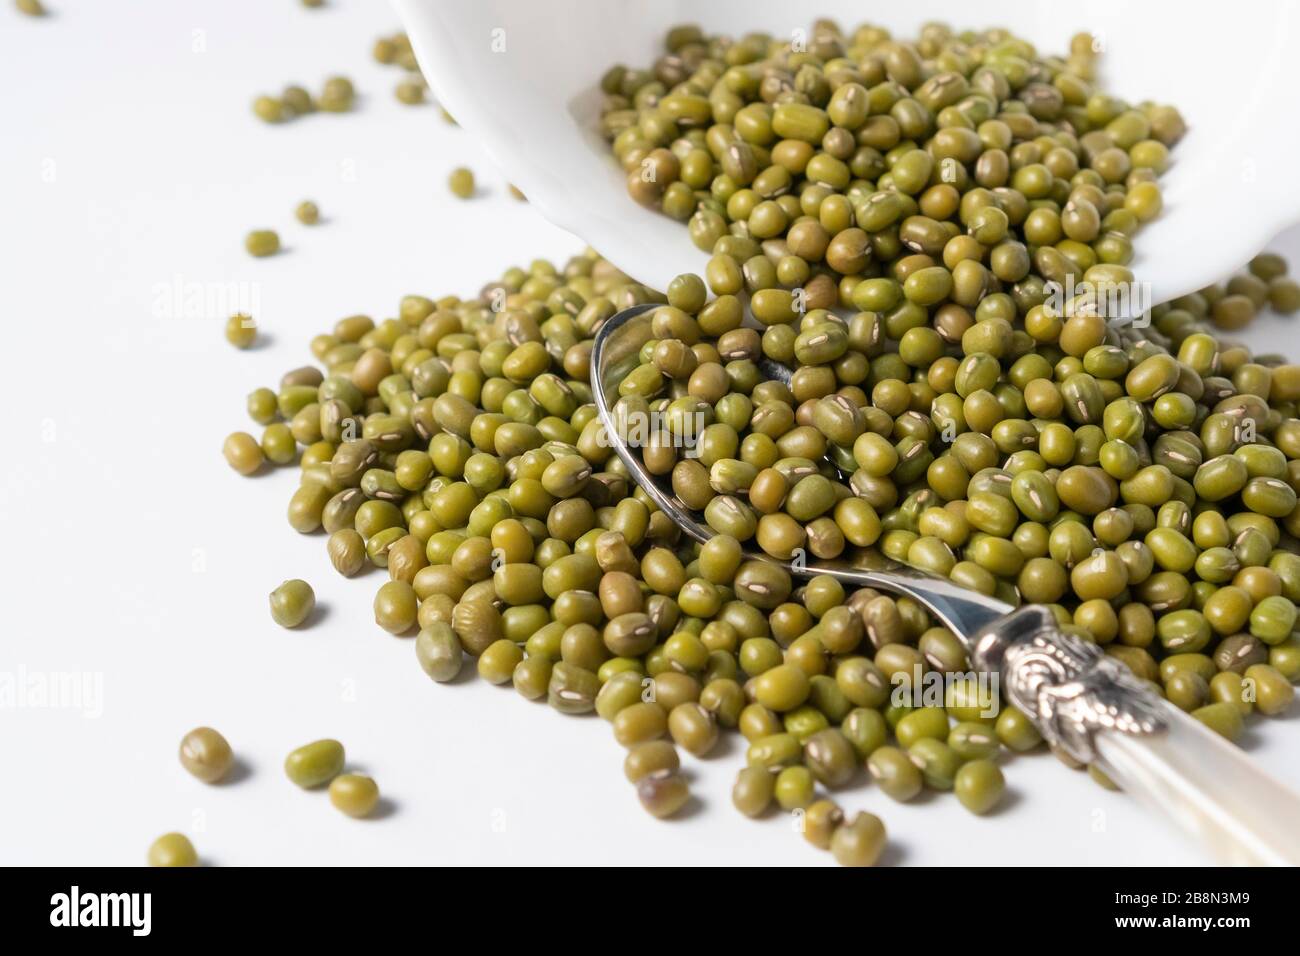 Heap of green mung beans in a white ceramic bowl on a white table close-up Stock Photo